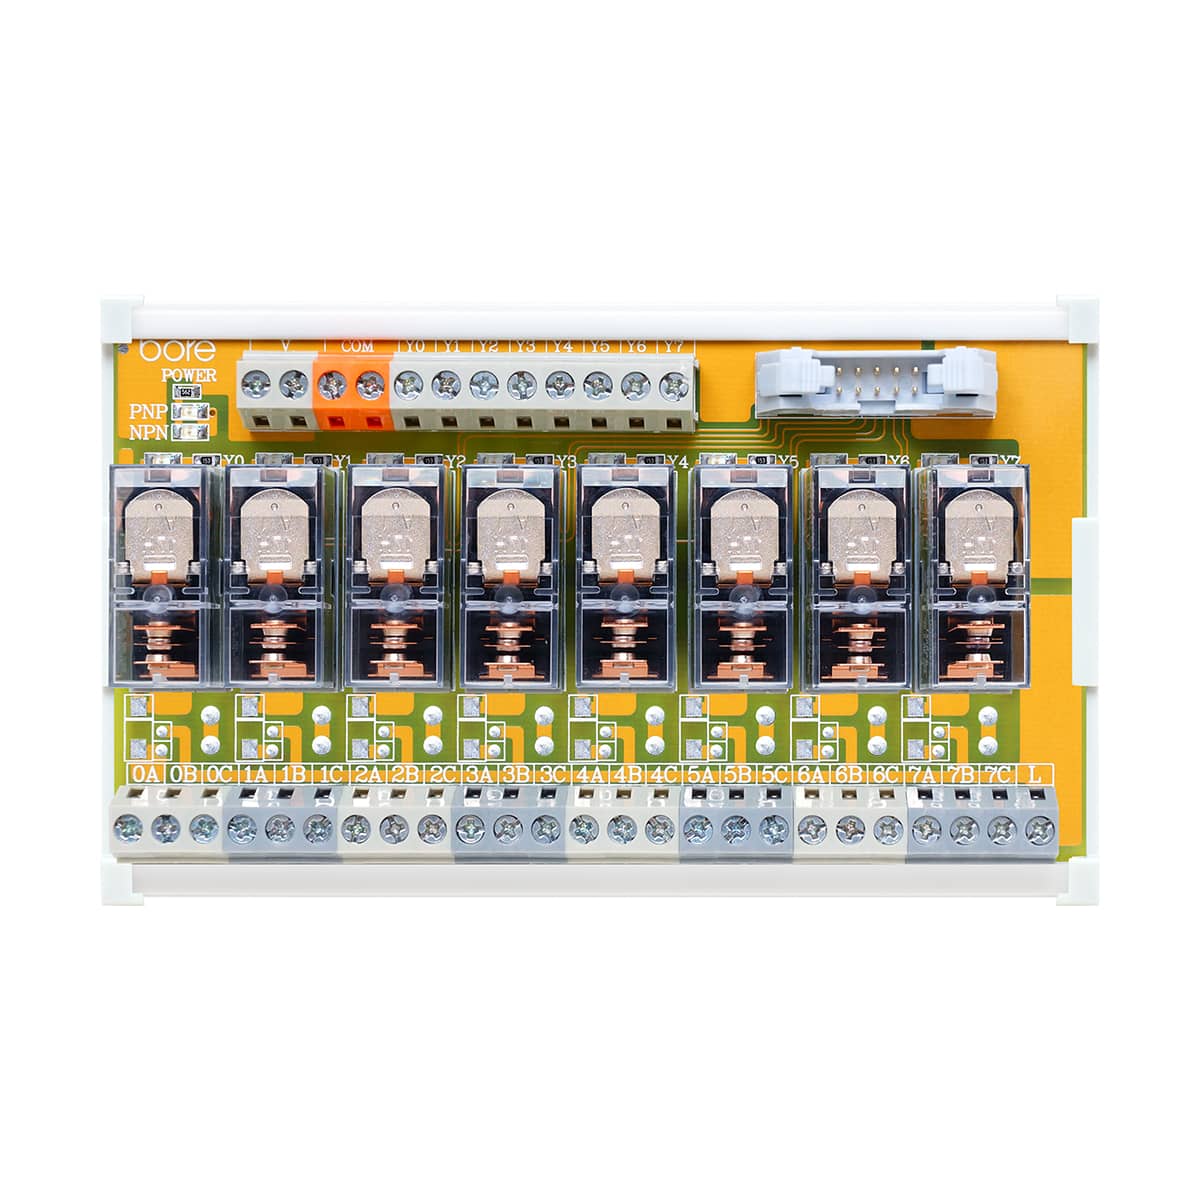 Products|Relay Module G2R-OR08